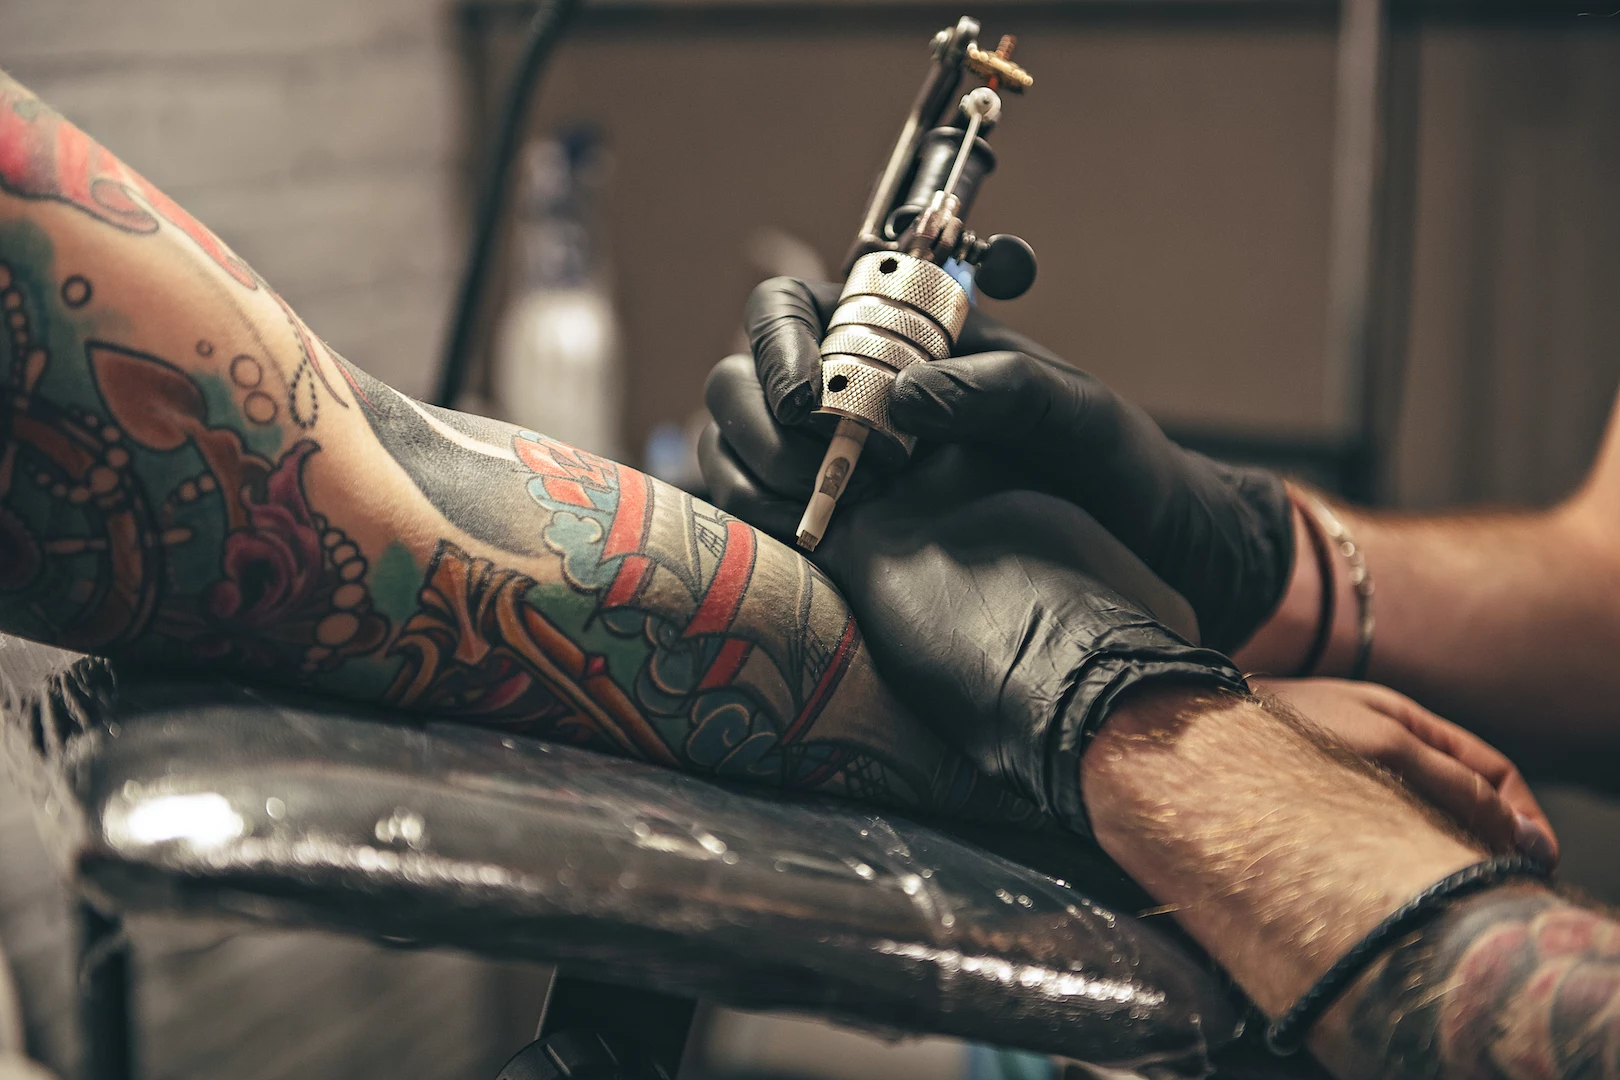 Bicep Tattoo Pain: How Much Do They Hurt? - AuthorityTattoo